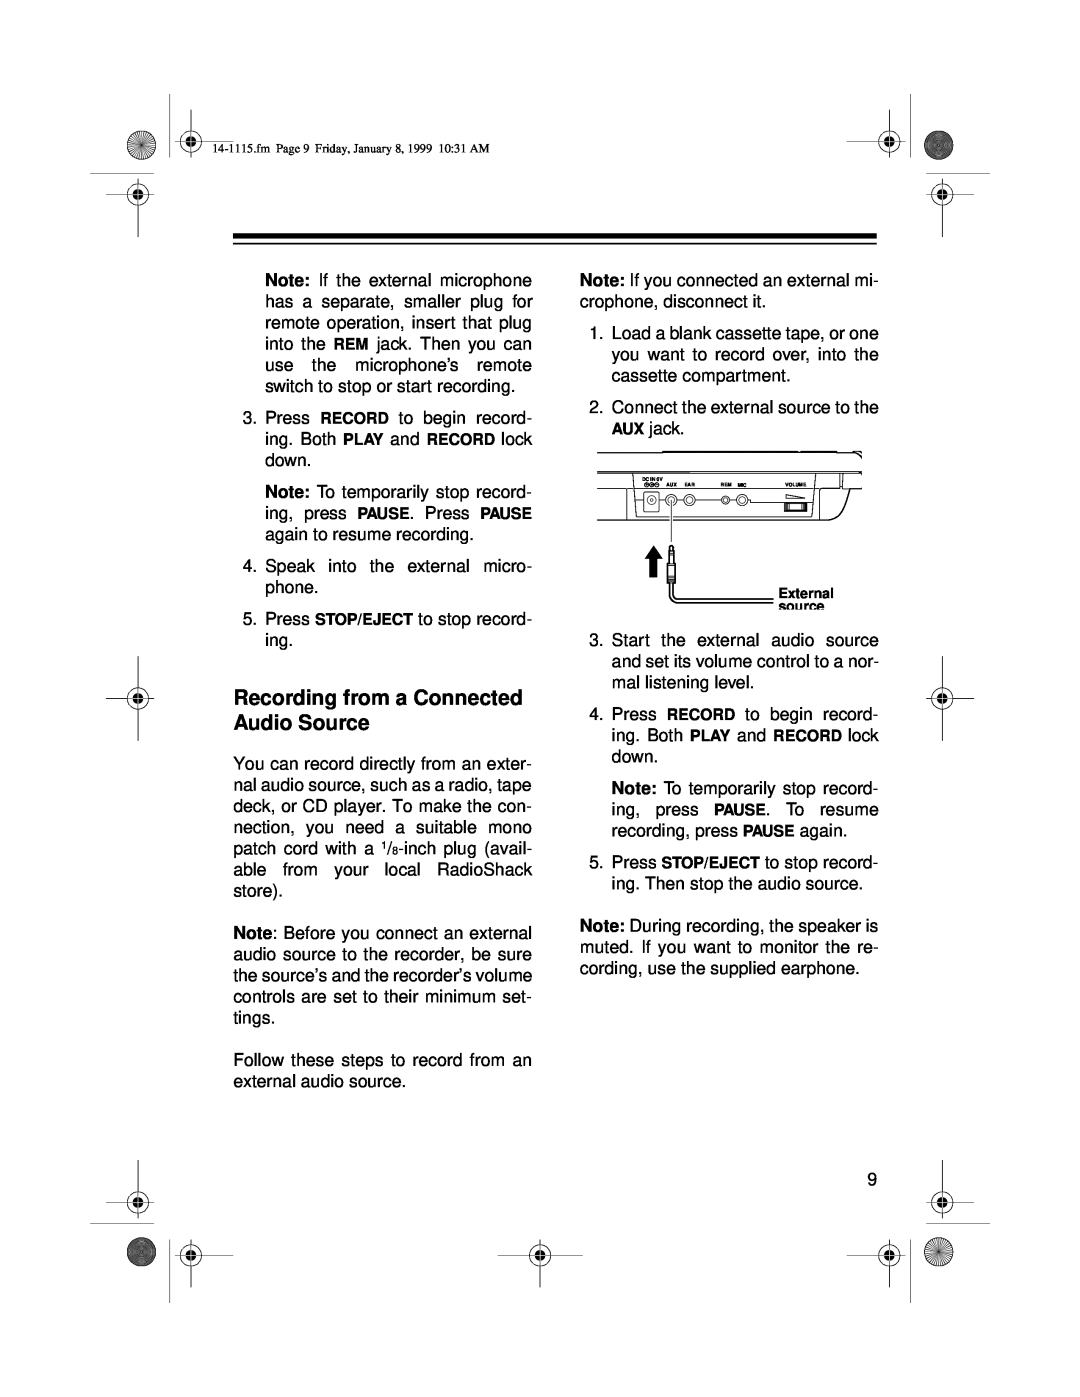 Optimus CTR-108 owner manual Recording from a Connected Audio Source 